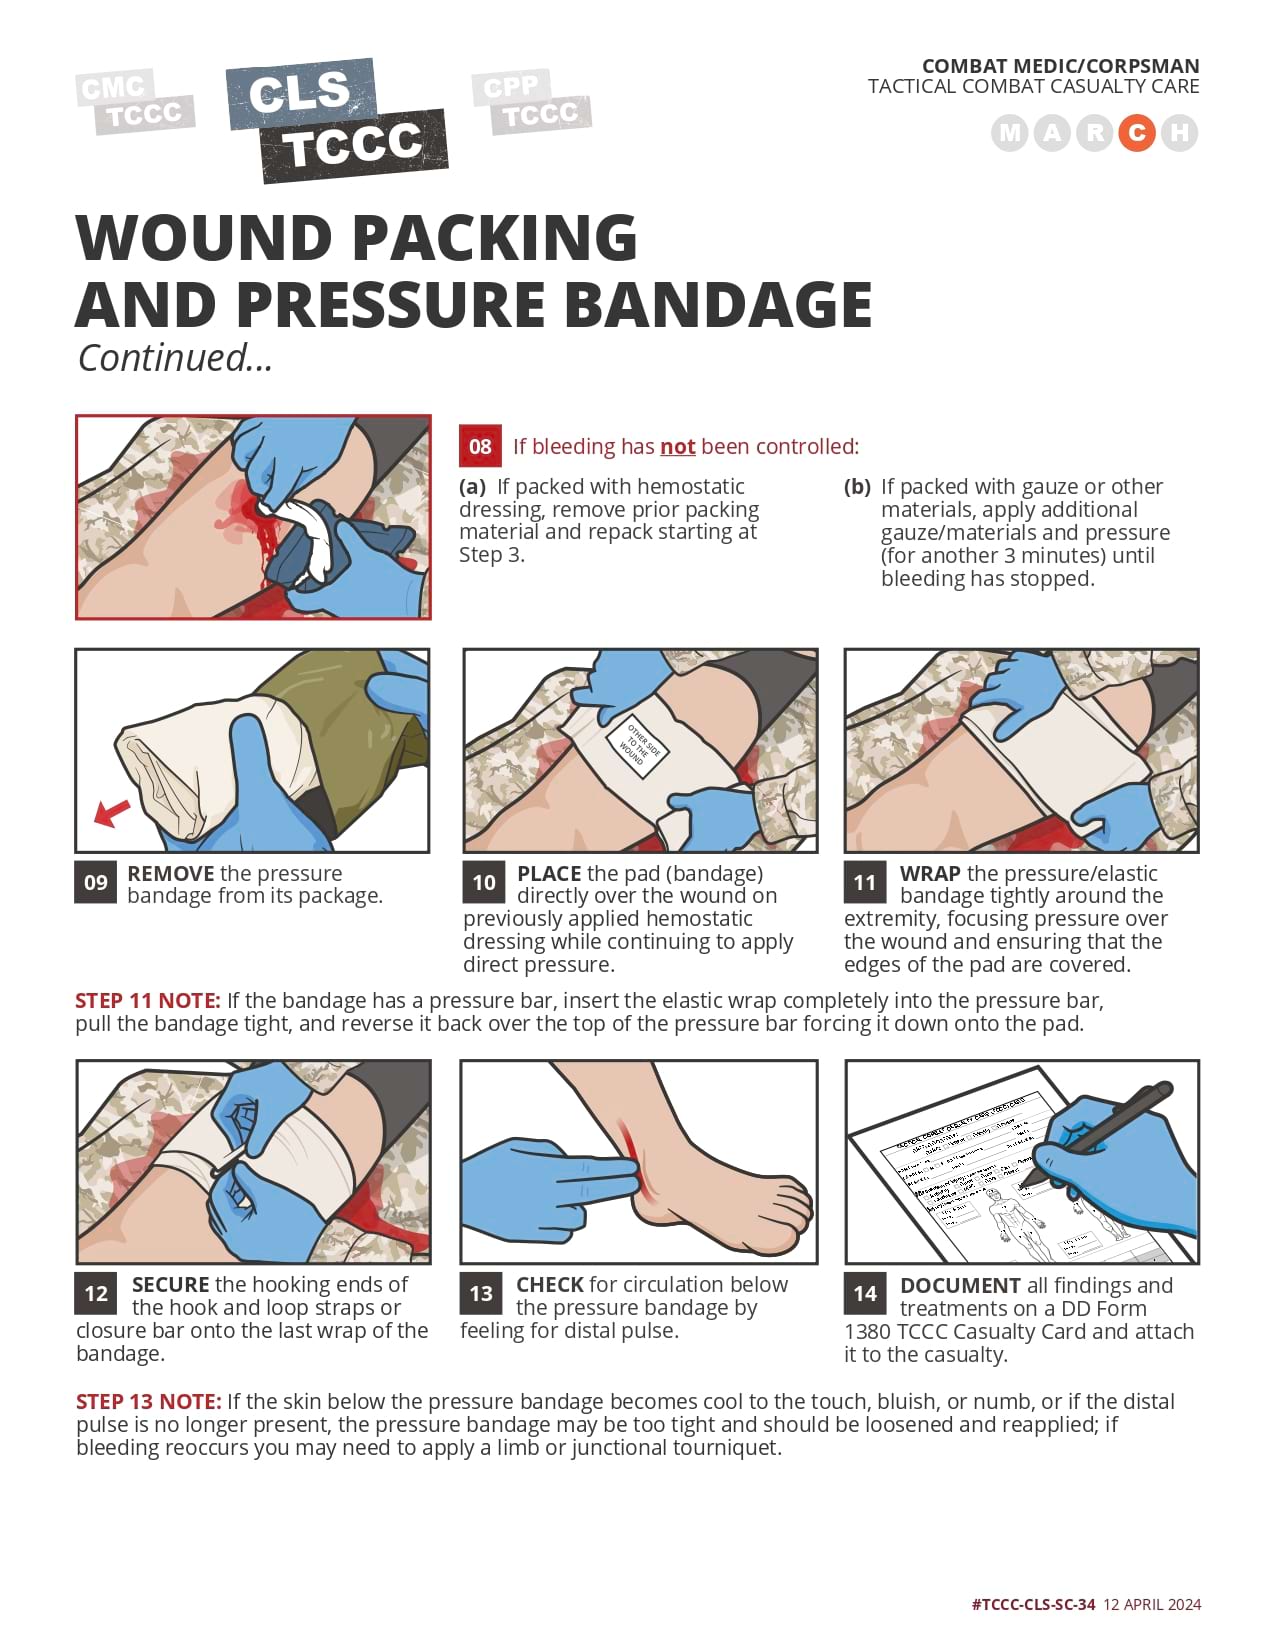 Wound Packing and Pressure Bandage, page 2